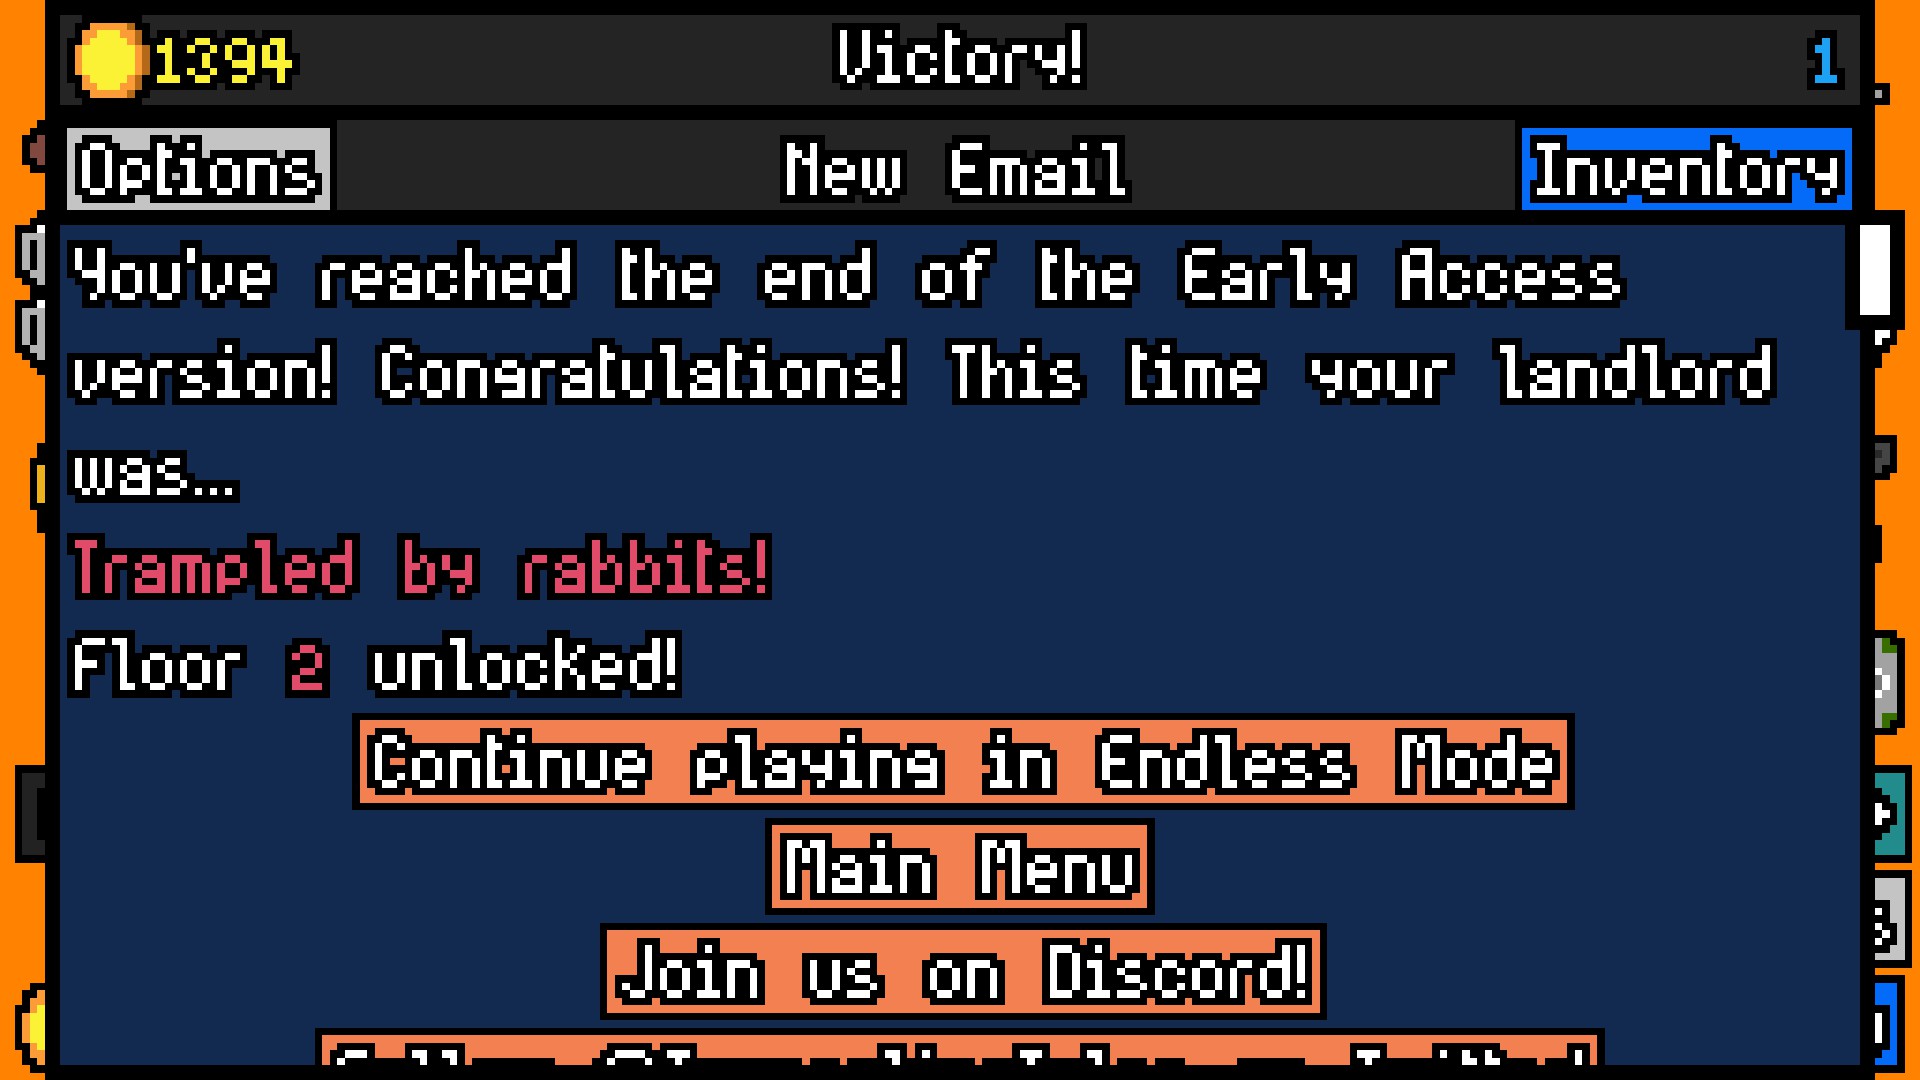 "You've reached the end of the Early Access version! Congratulations! This time your landlord was trampled by rabbits! Floor 2 unlocked!"